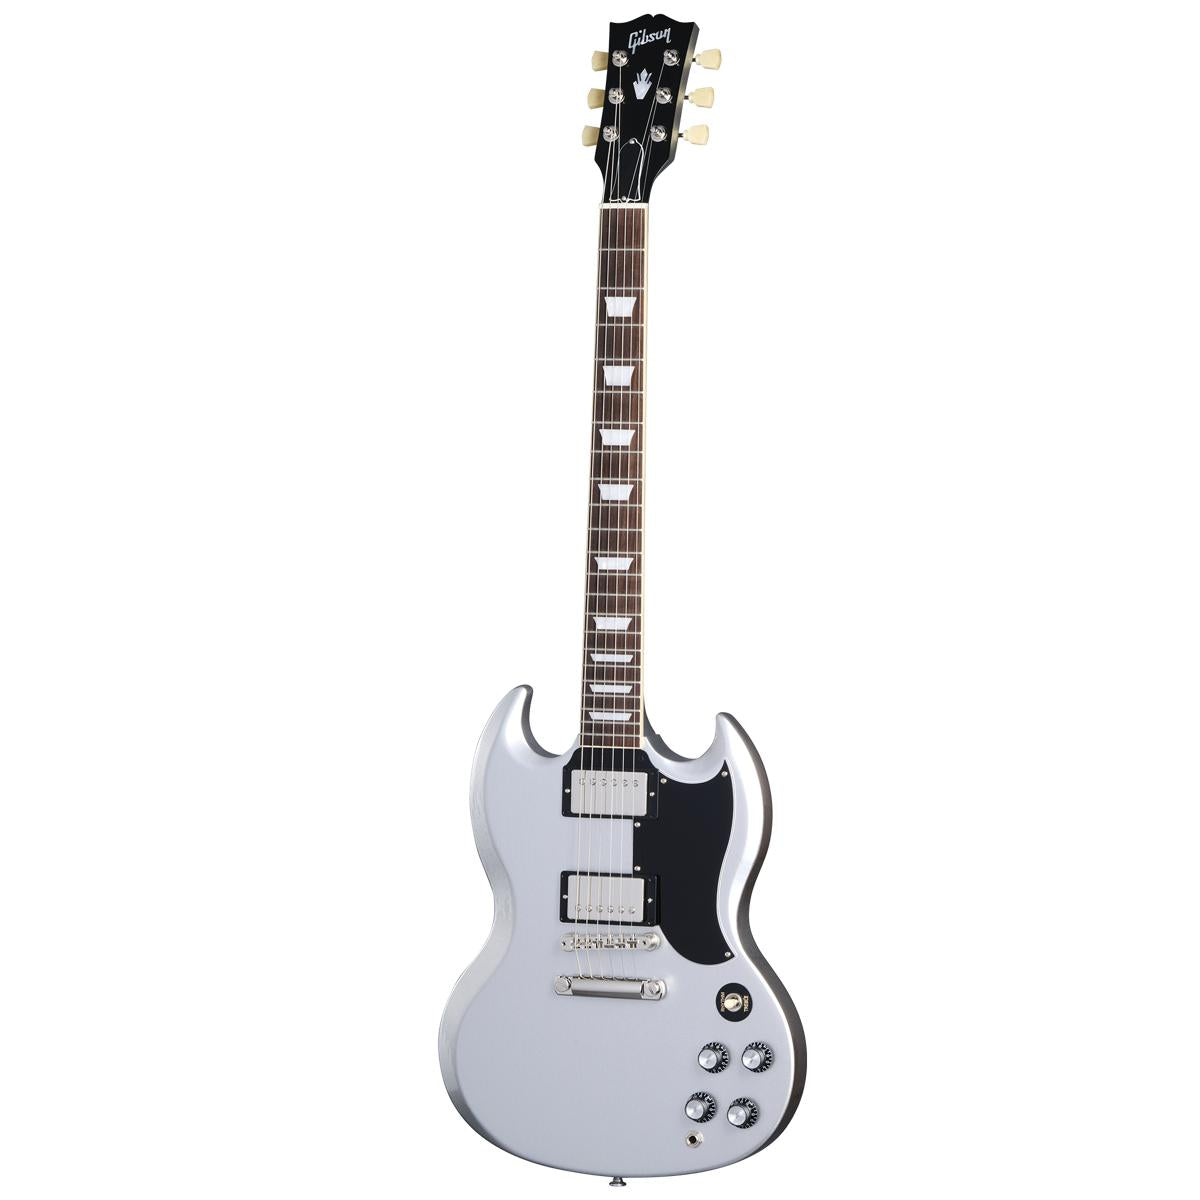 Gibson SG Standard 61 Electric Guitar Silver Mist w/ Hardcase - SG6100S1NH1